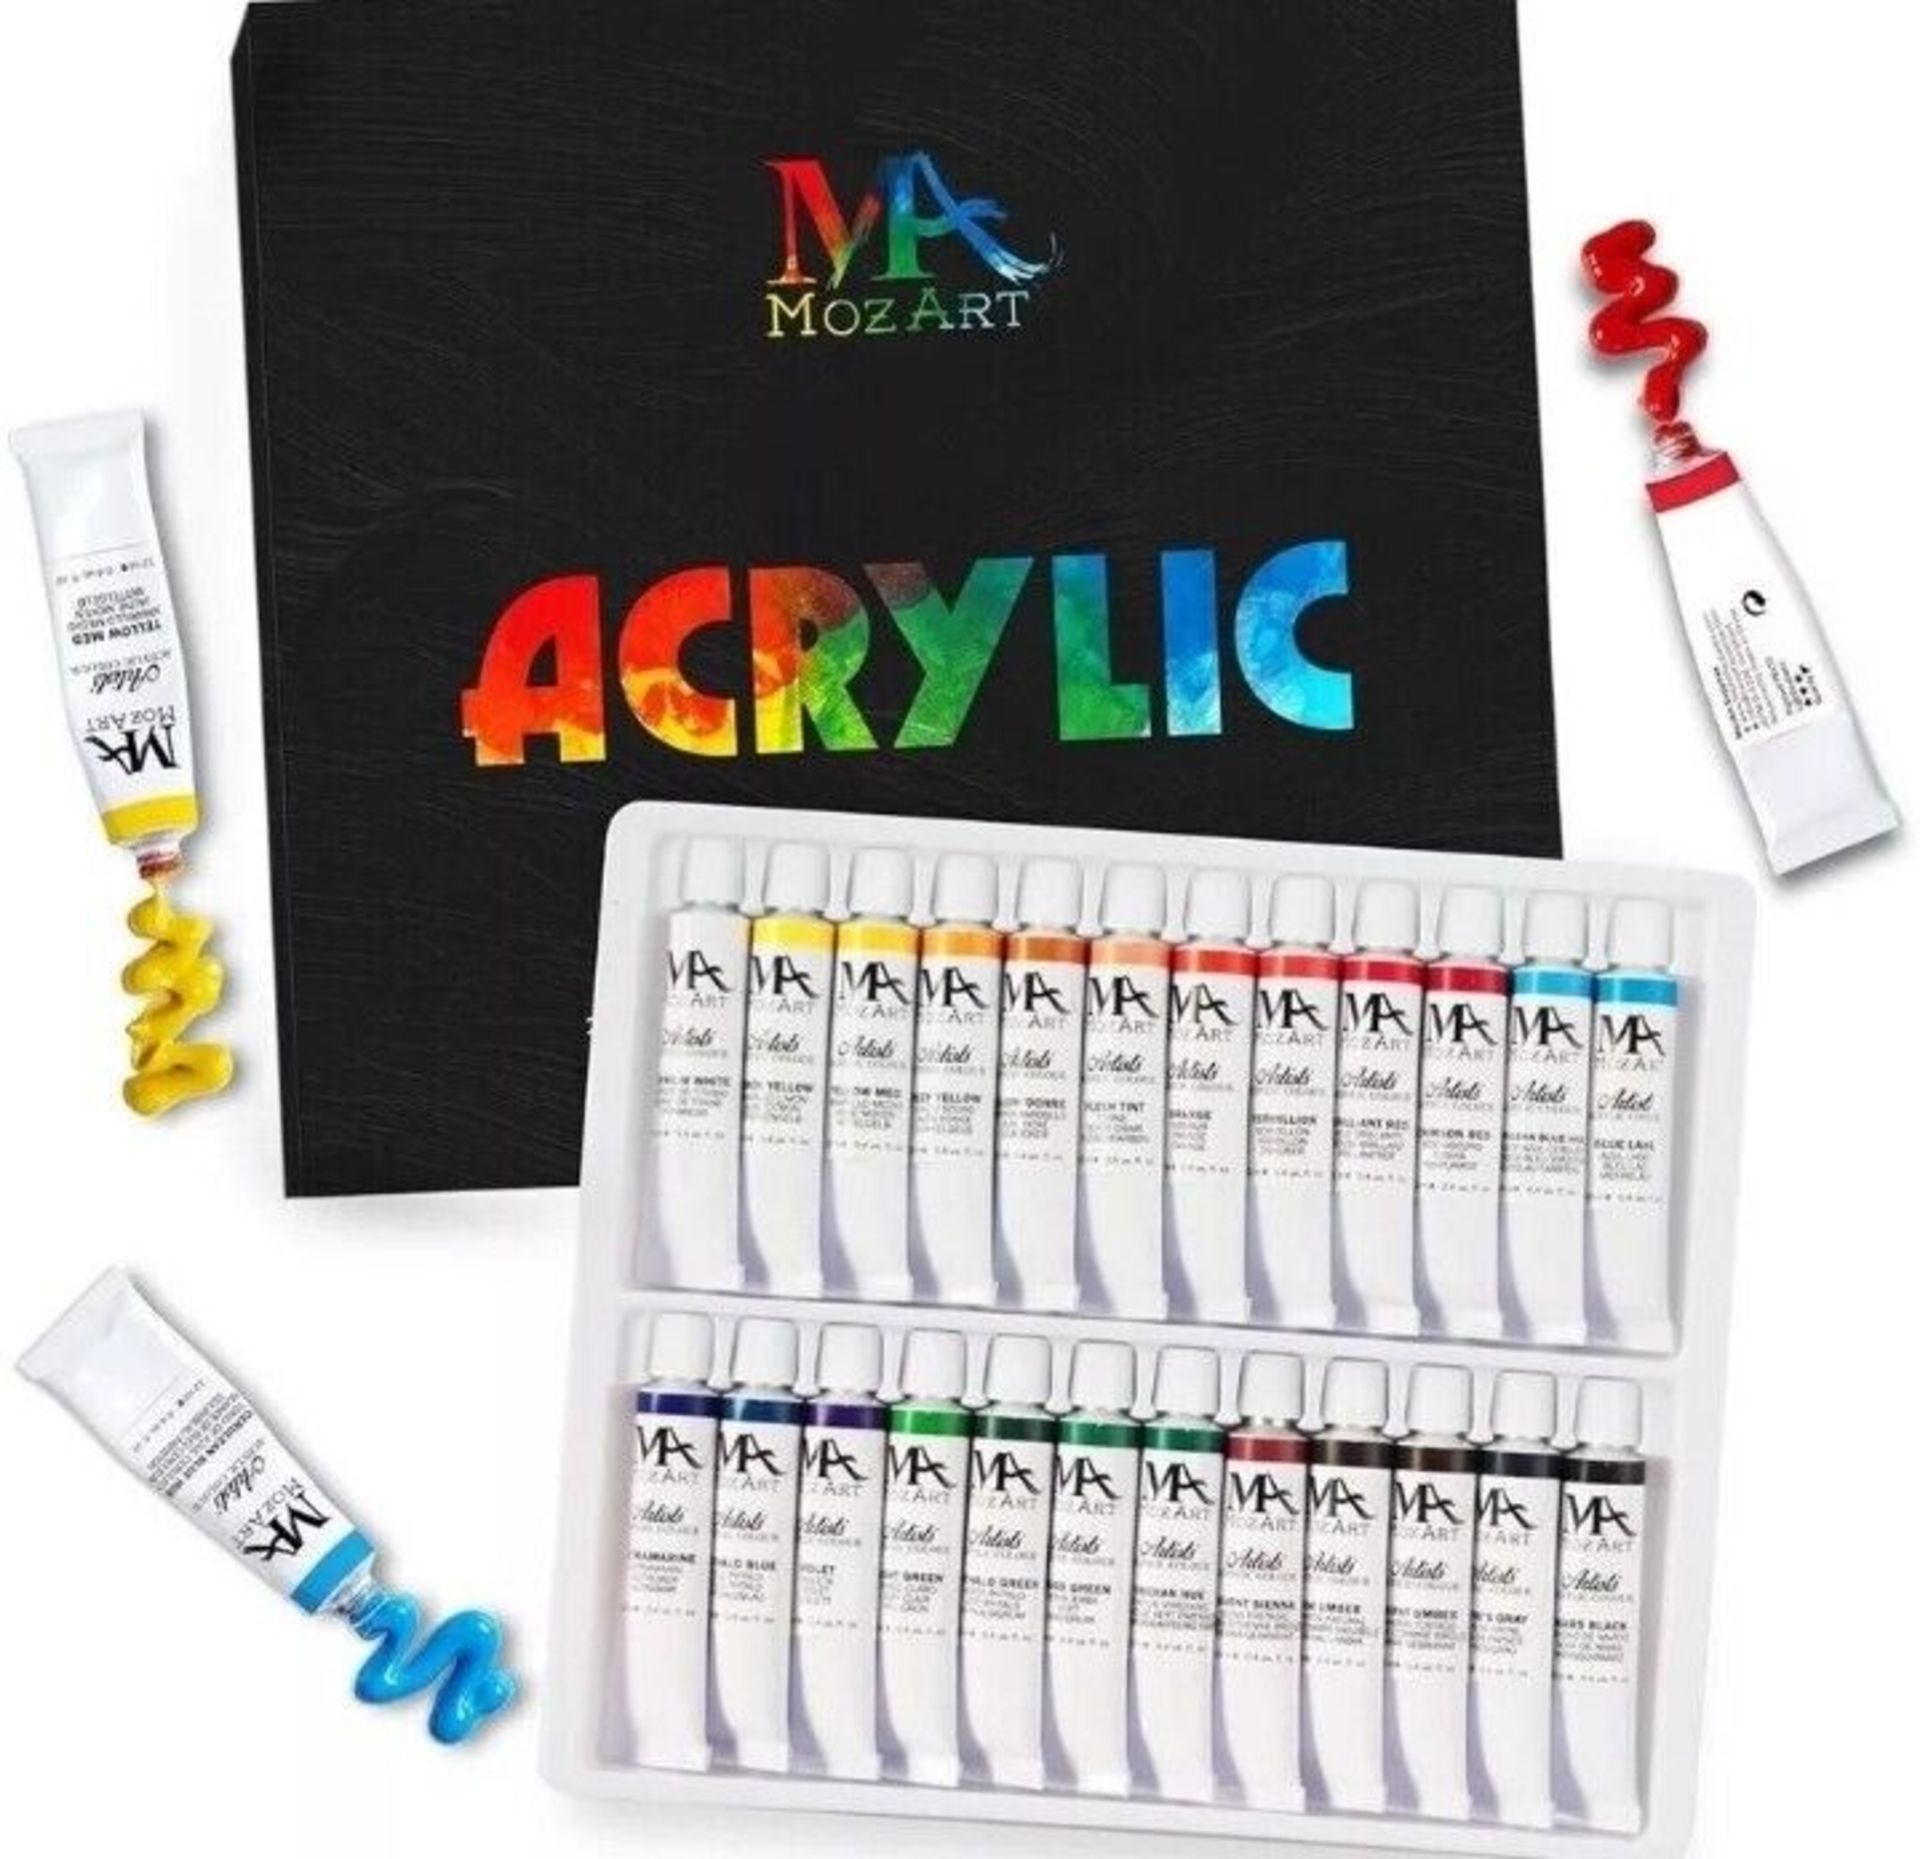 14 X BRAND NEW MOZART SETS OF 24 ACRYLIC ASSORTED PAINTS R15-1